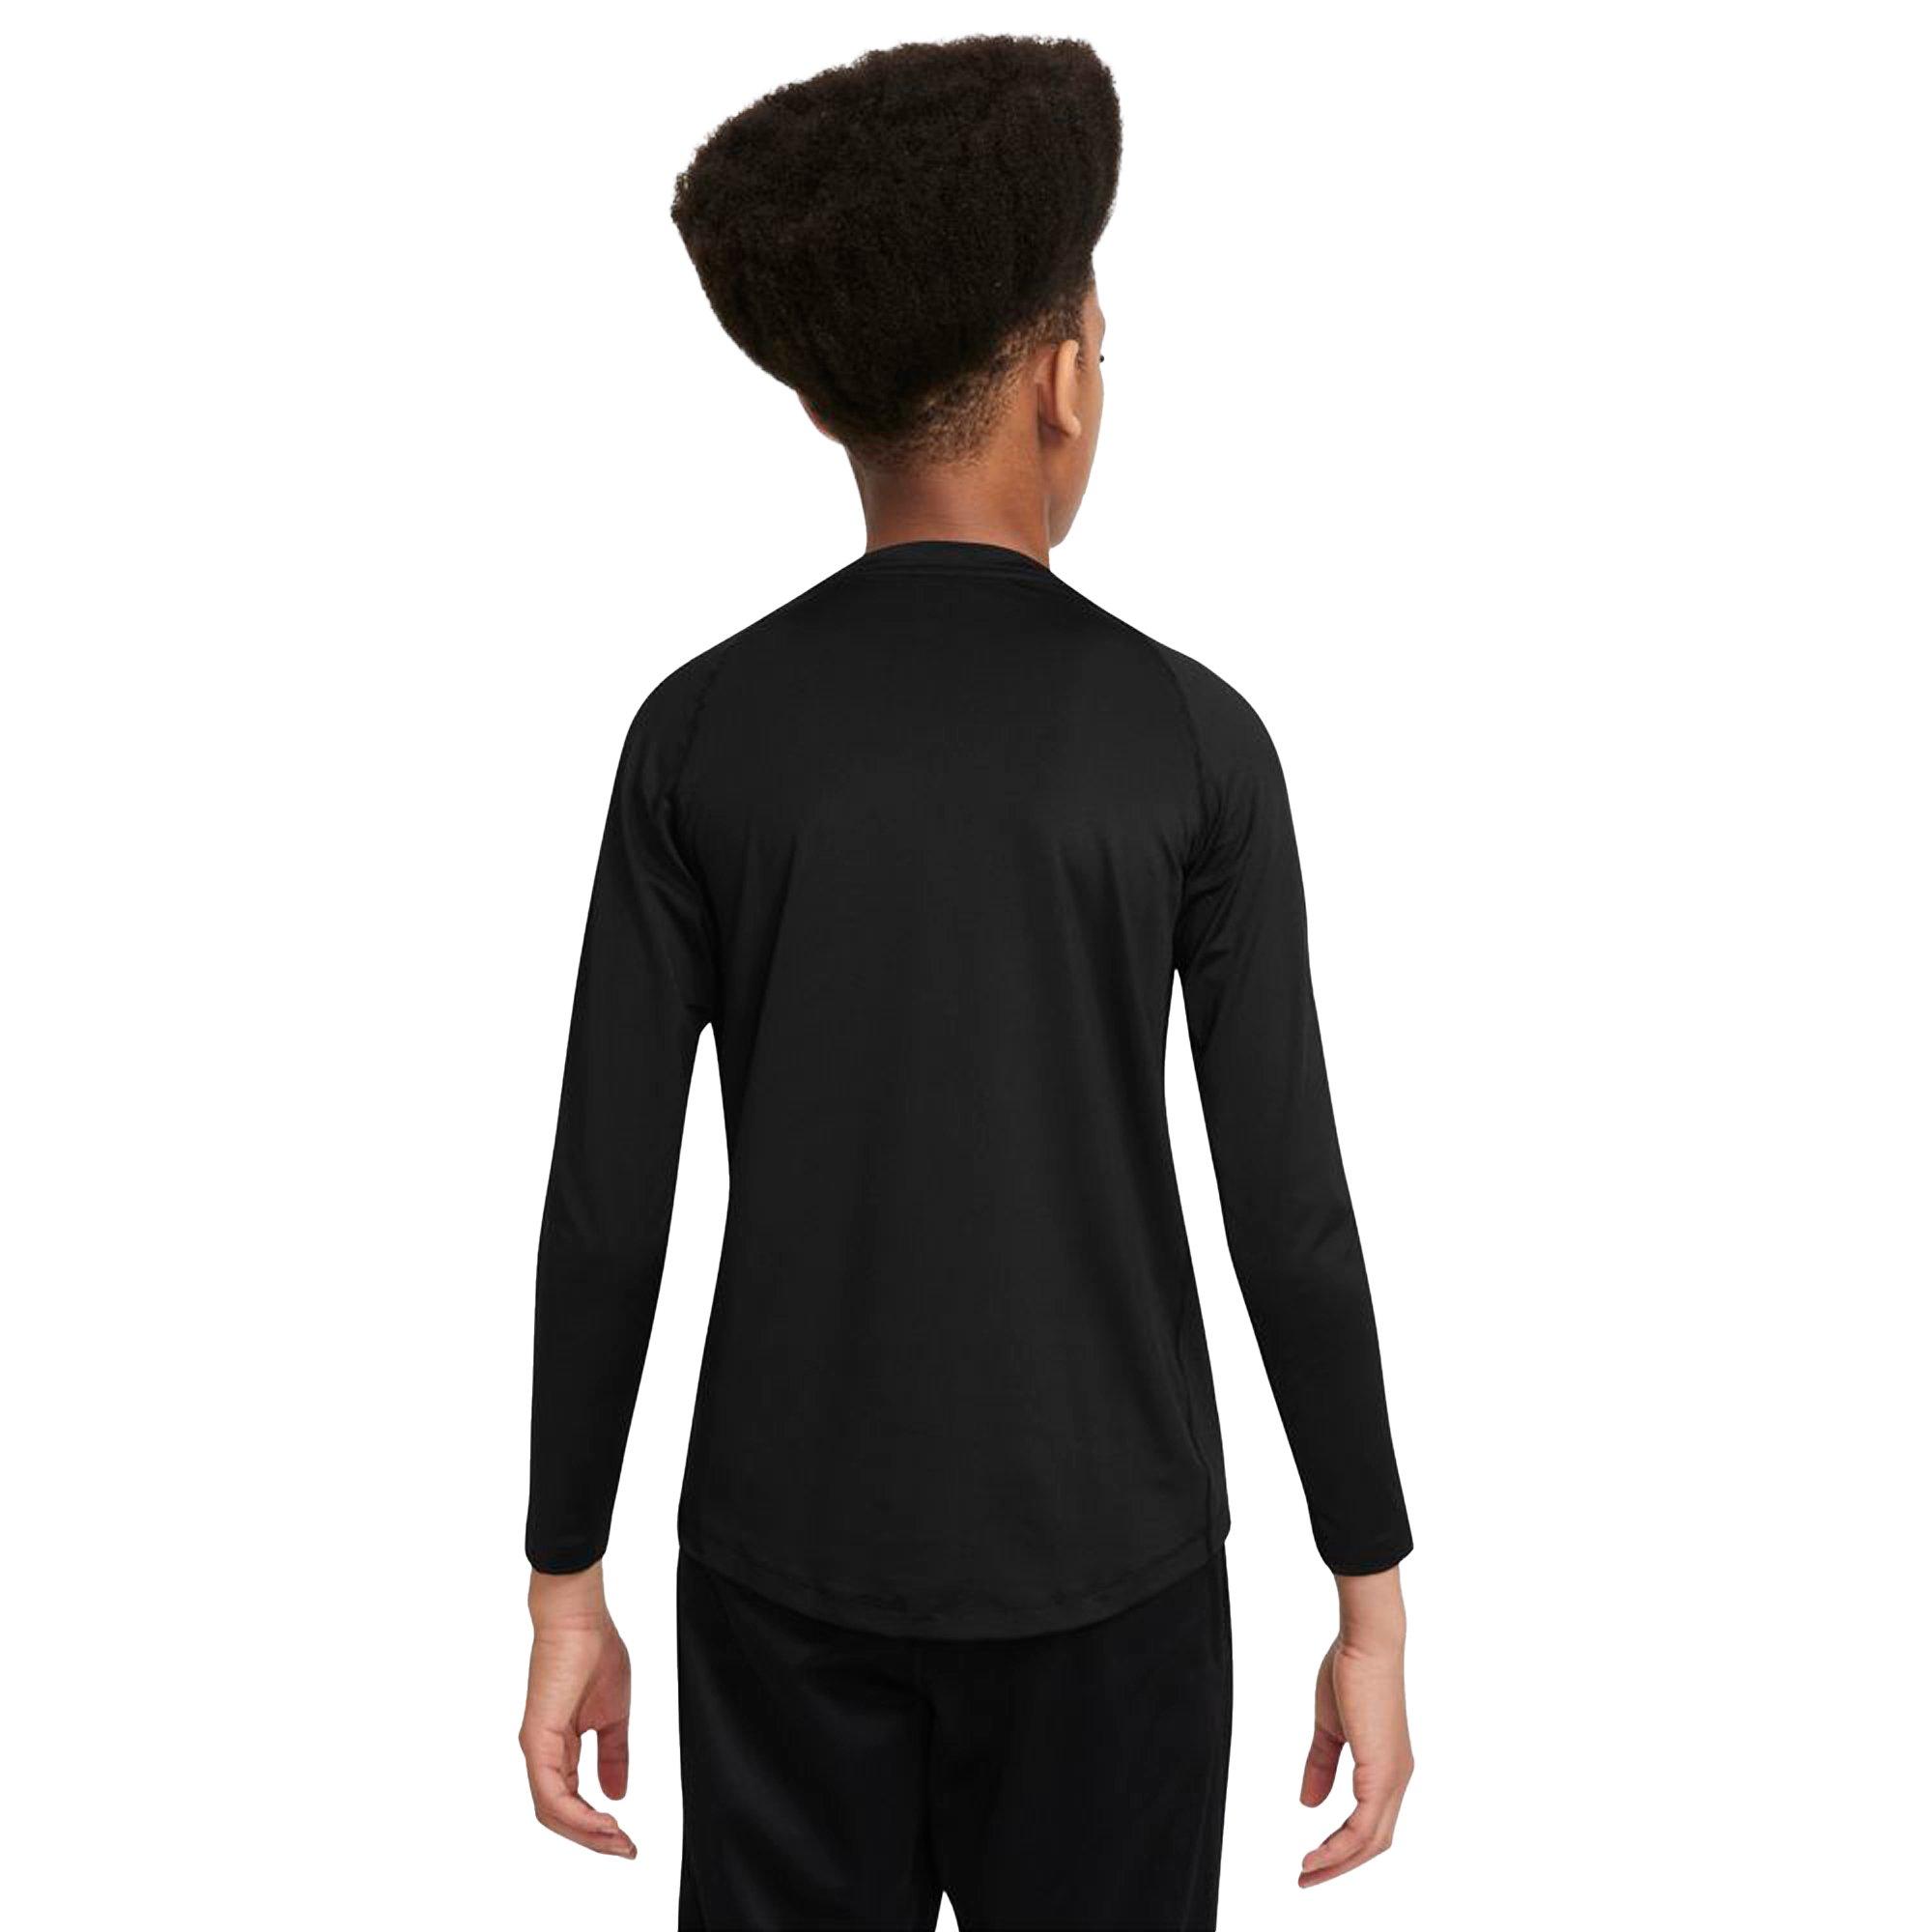 Nike Boys Pro Fitted Top - Black/White Size S